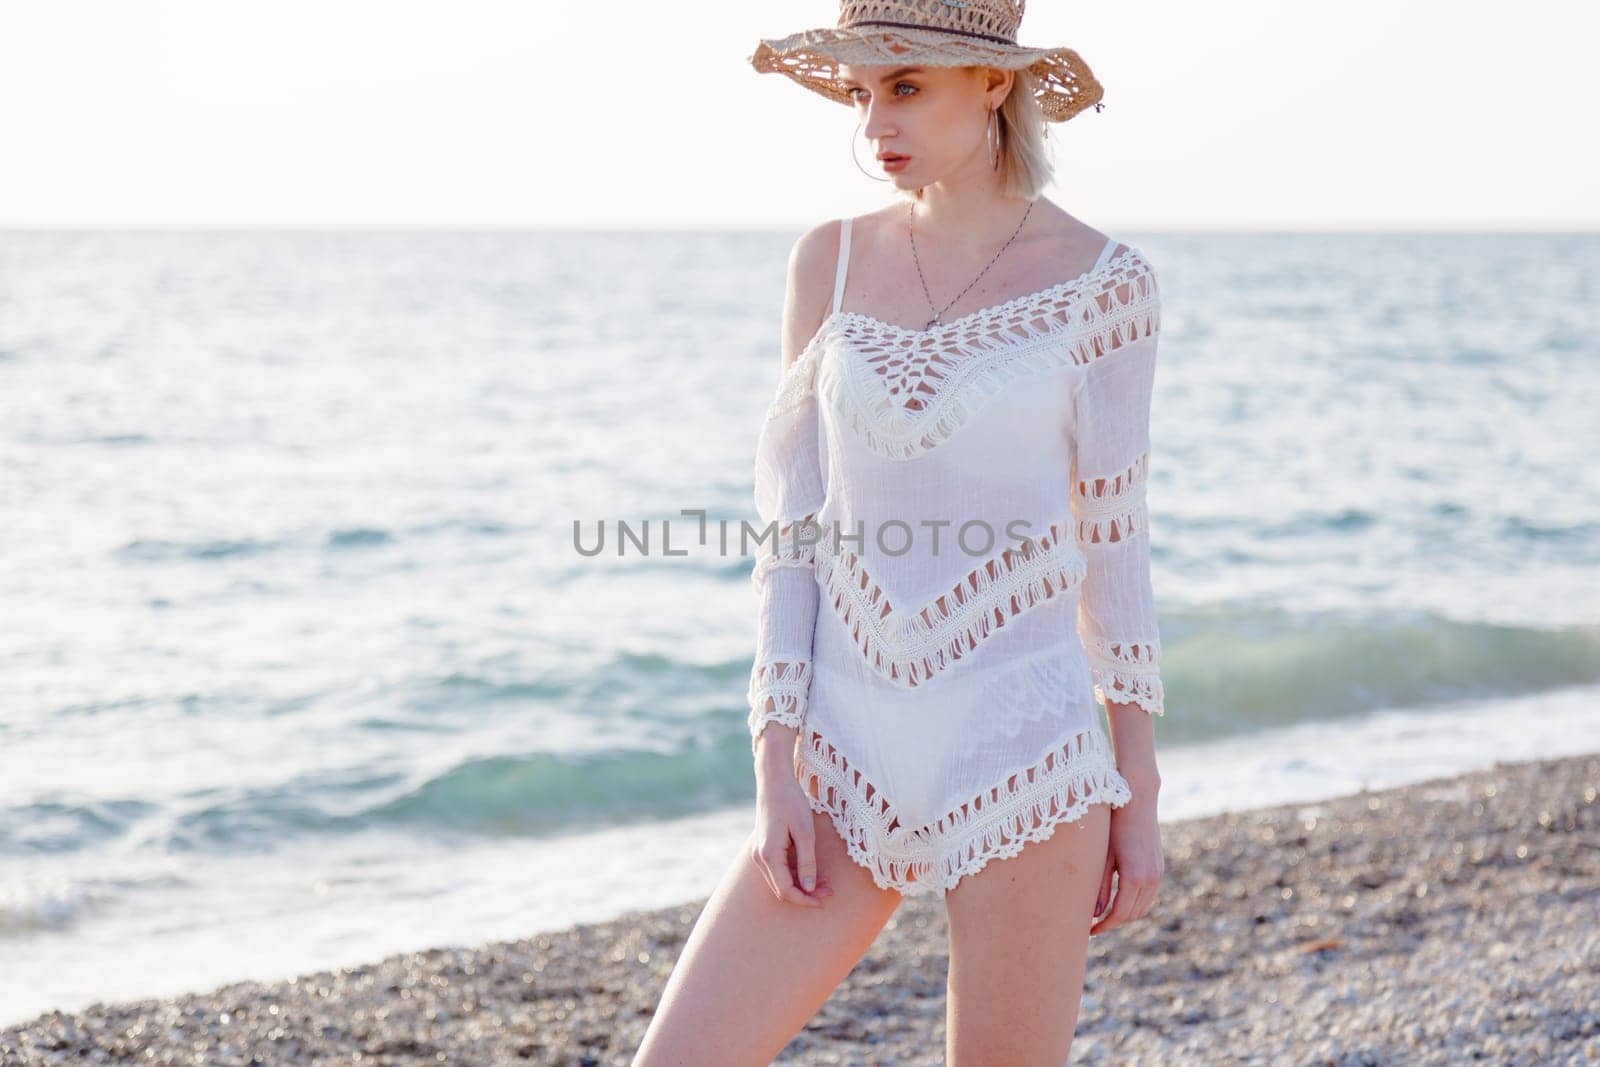 Beautiful woman blonde in a white dress on the beach by the sea